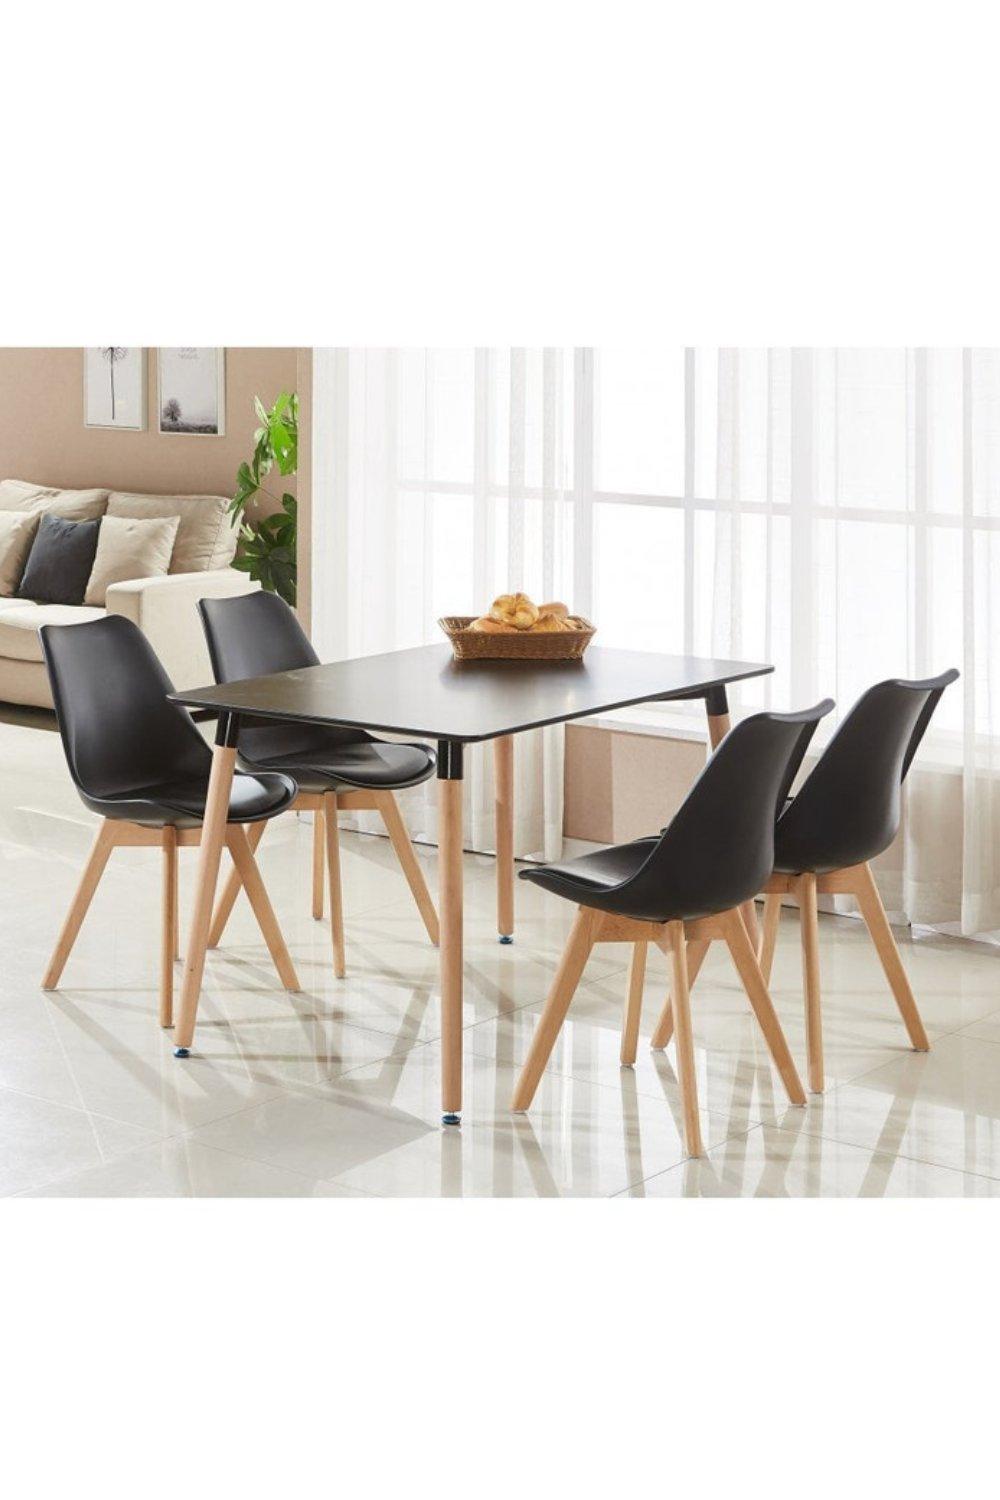 5PCs Dining Set - a Halo Dining Table & Set of 4 Lorenzo Tulip chairs with Padded Seat